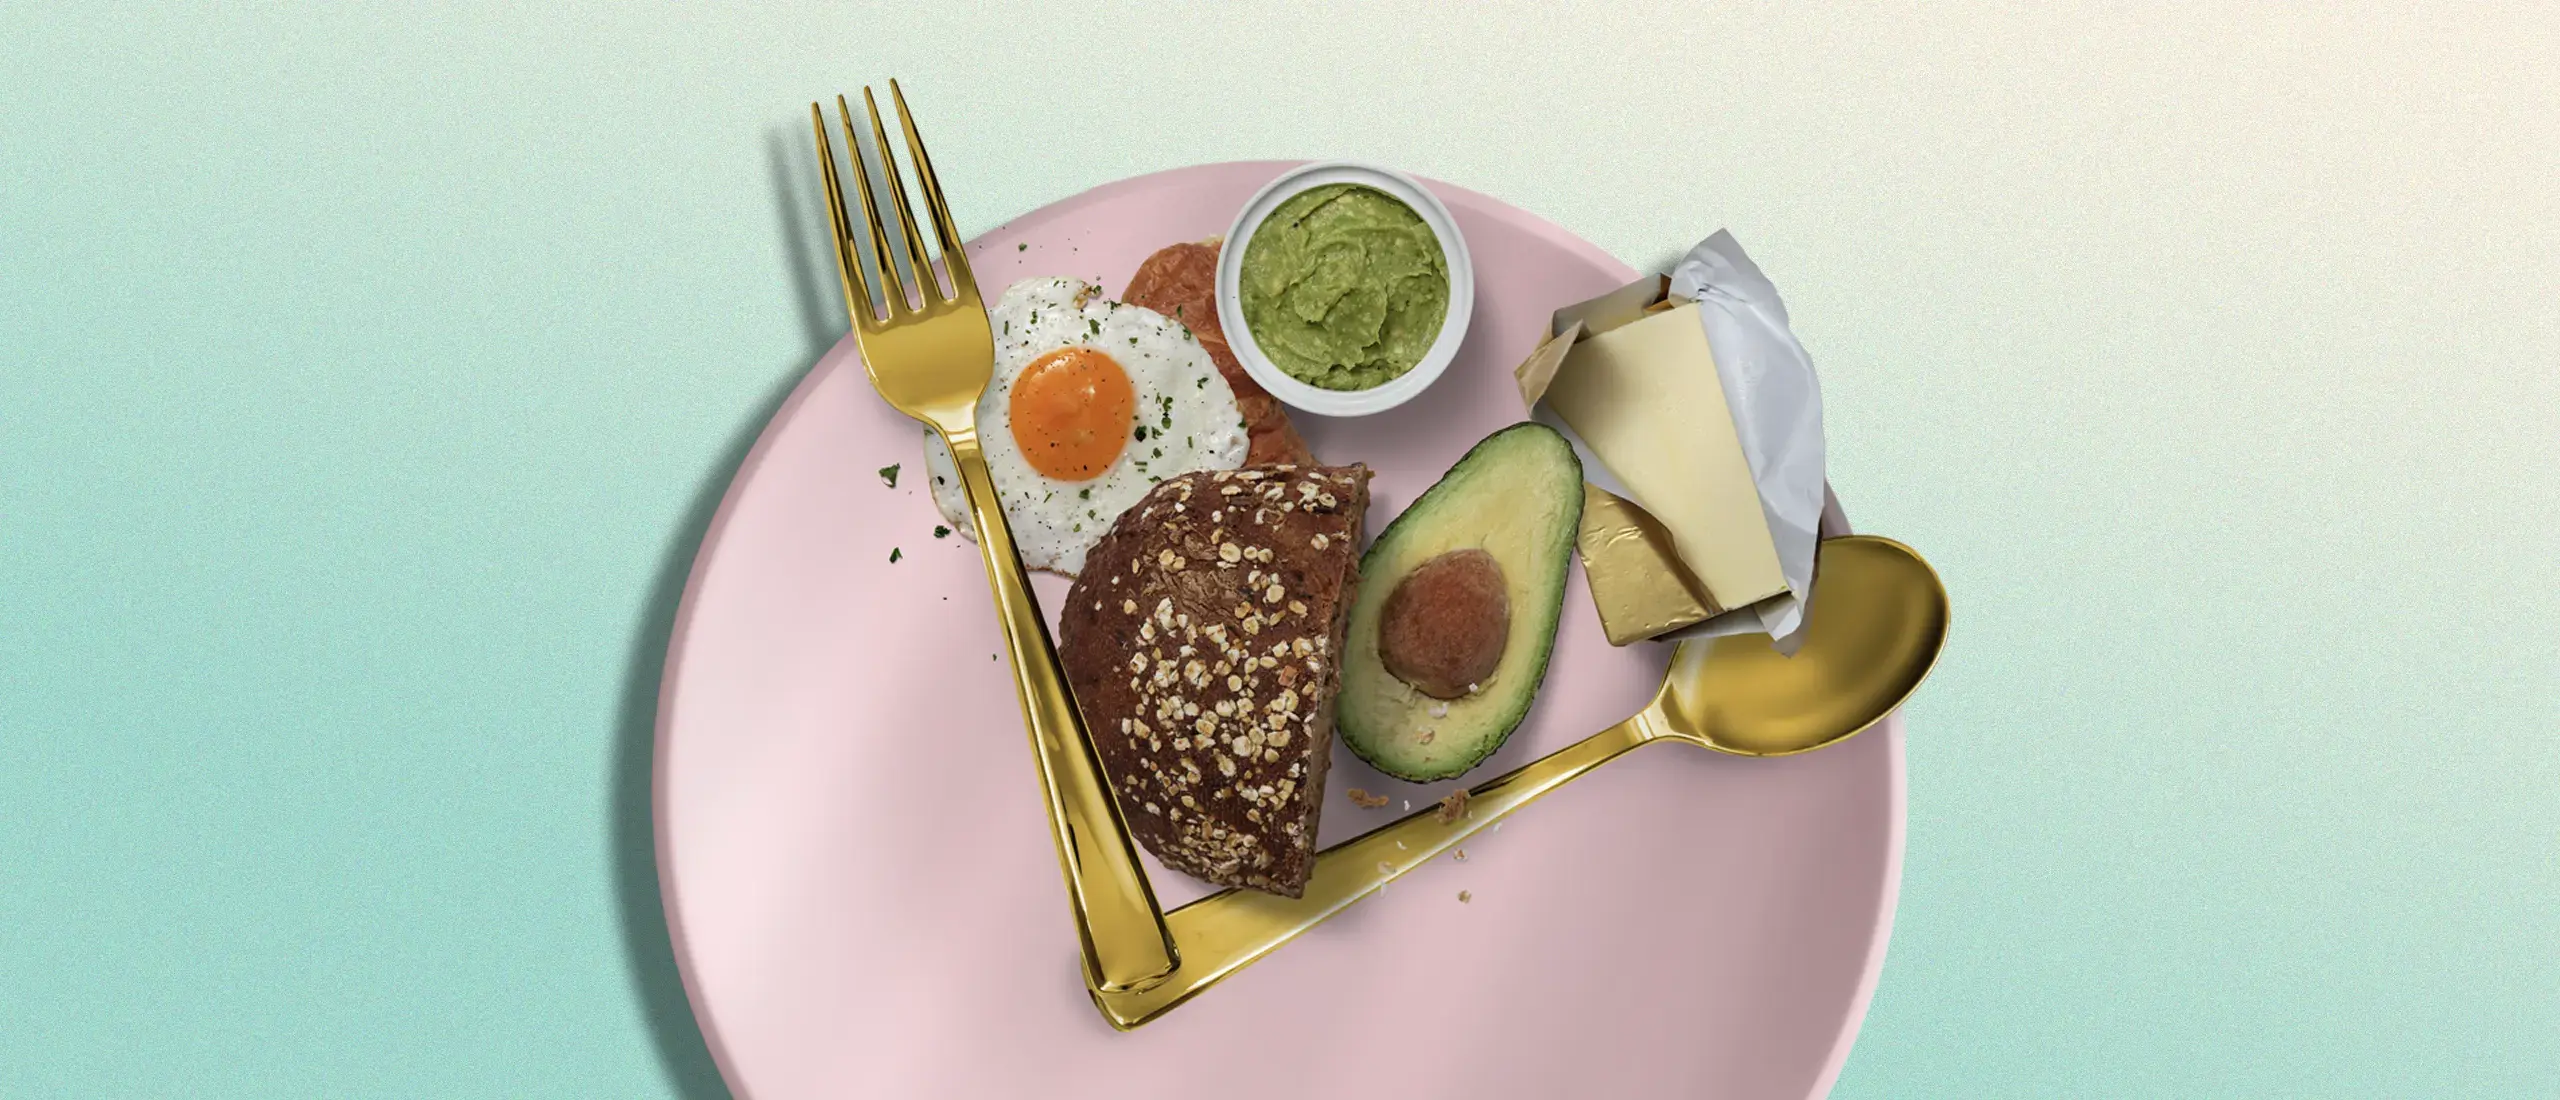 healthy plate of food with avocado, egg, and other stuff